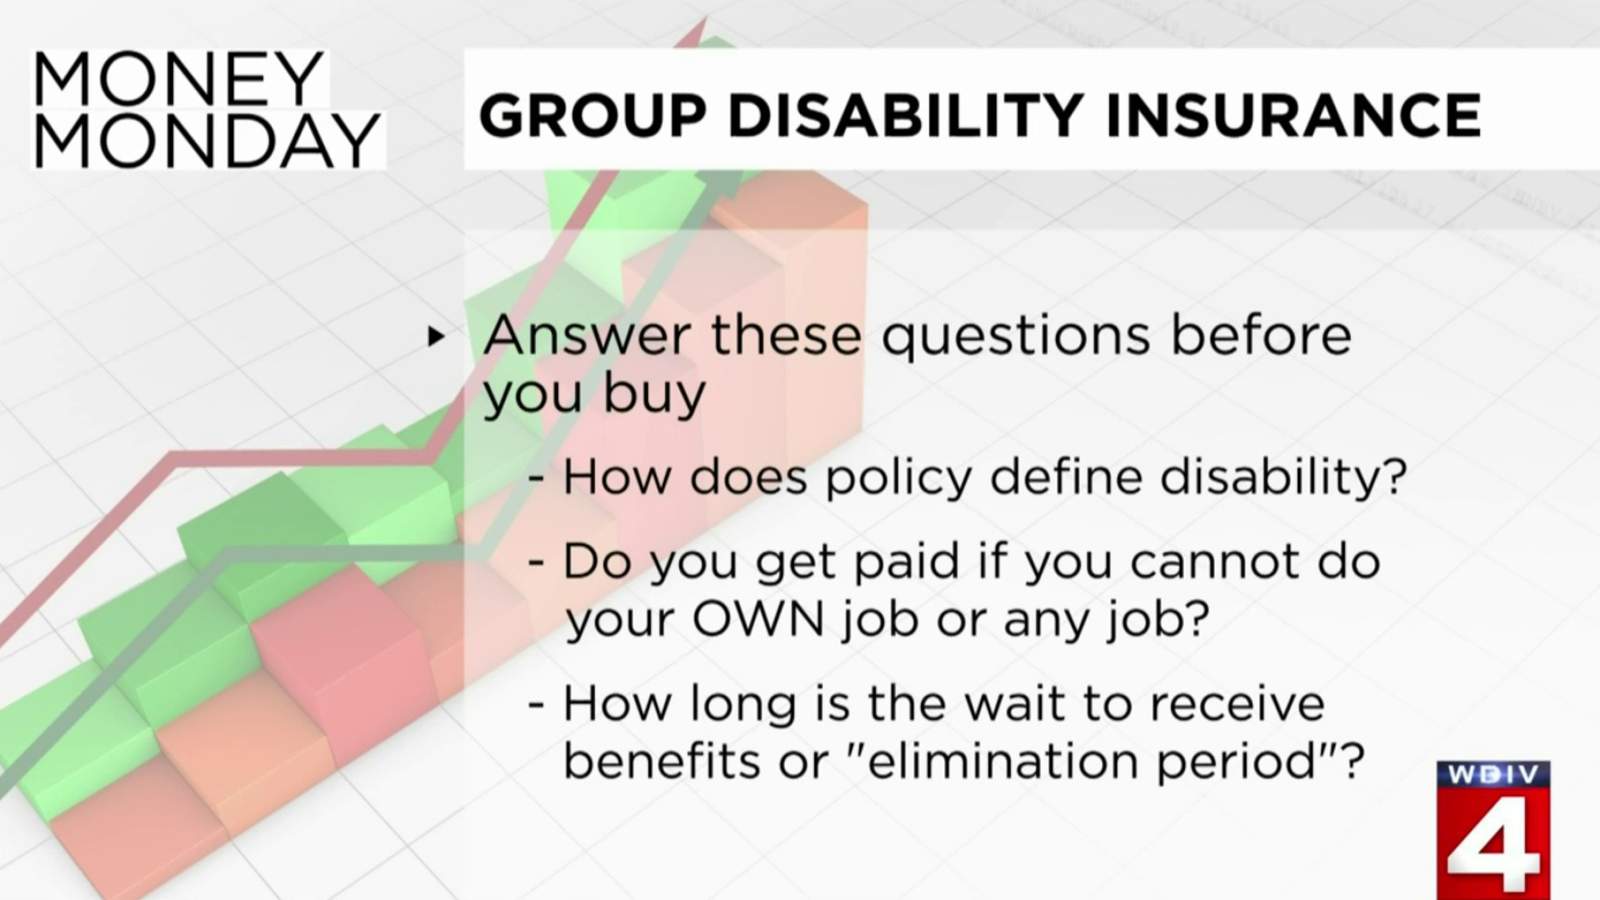 Money Monday financial tips: Group disability insurance